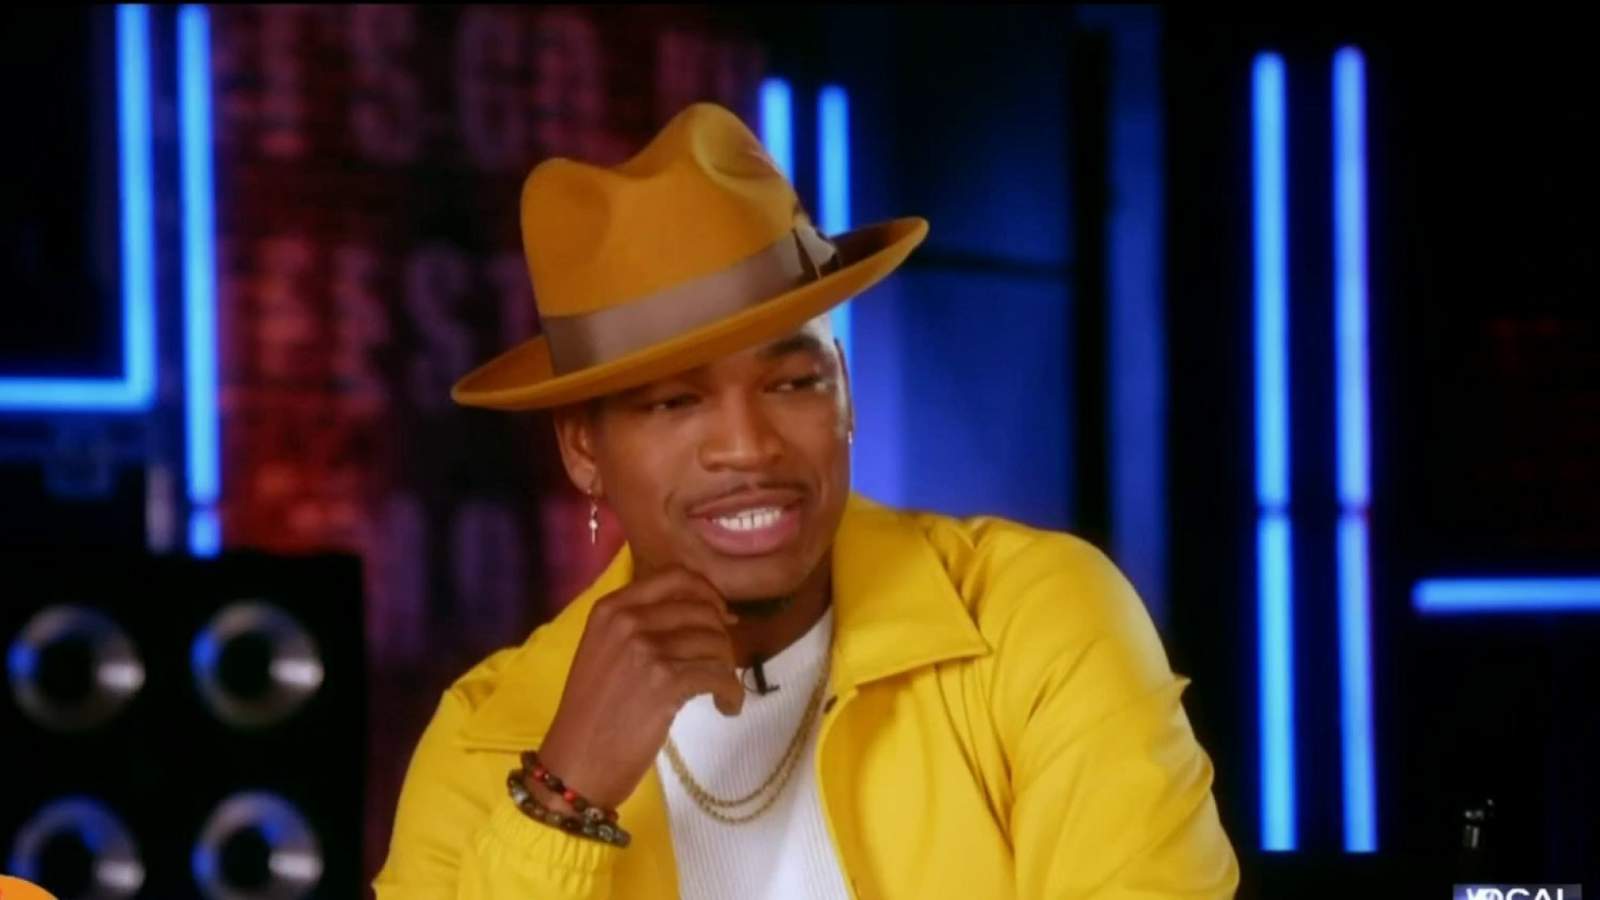 Heres what Ne-Yo said about working with J.Lo and his new music